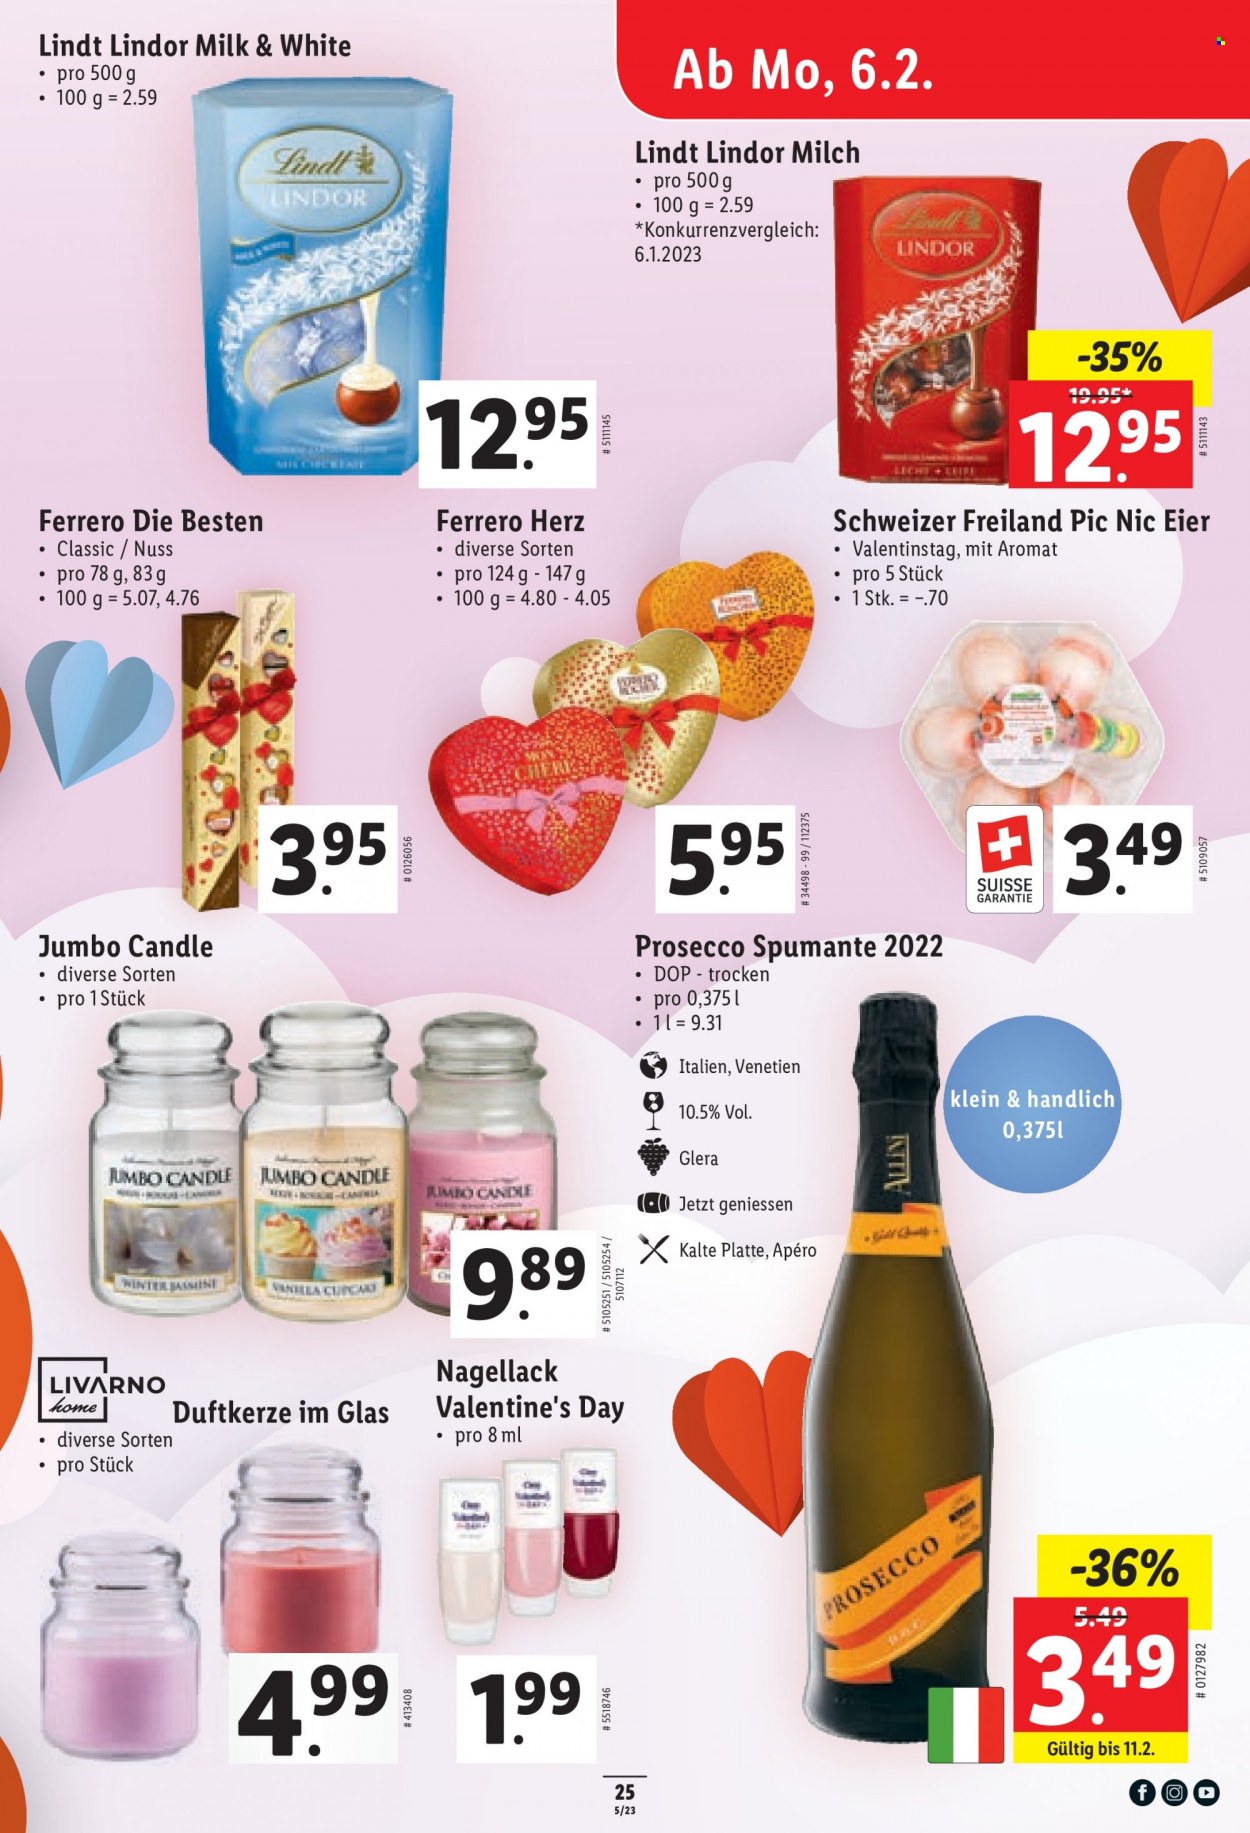 Catalogue Lidl - 2.2.2023 - 8.2.2023. Page 25.